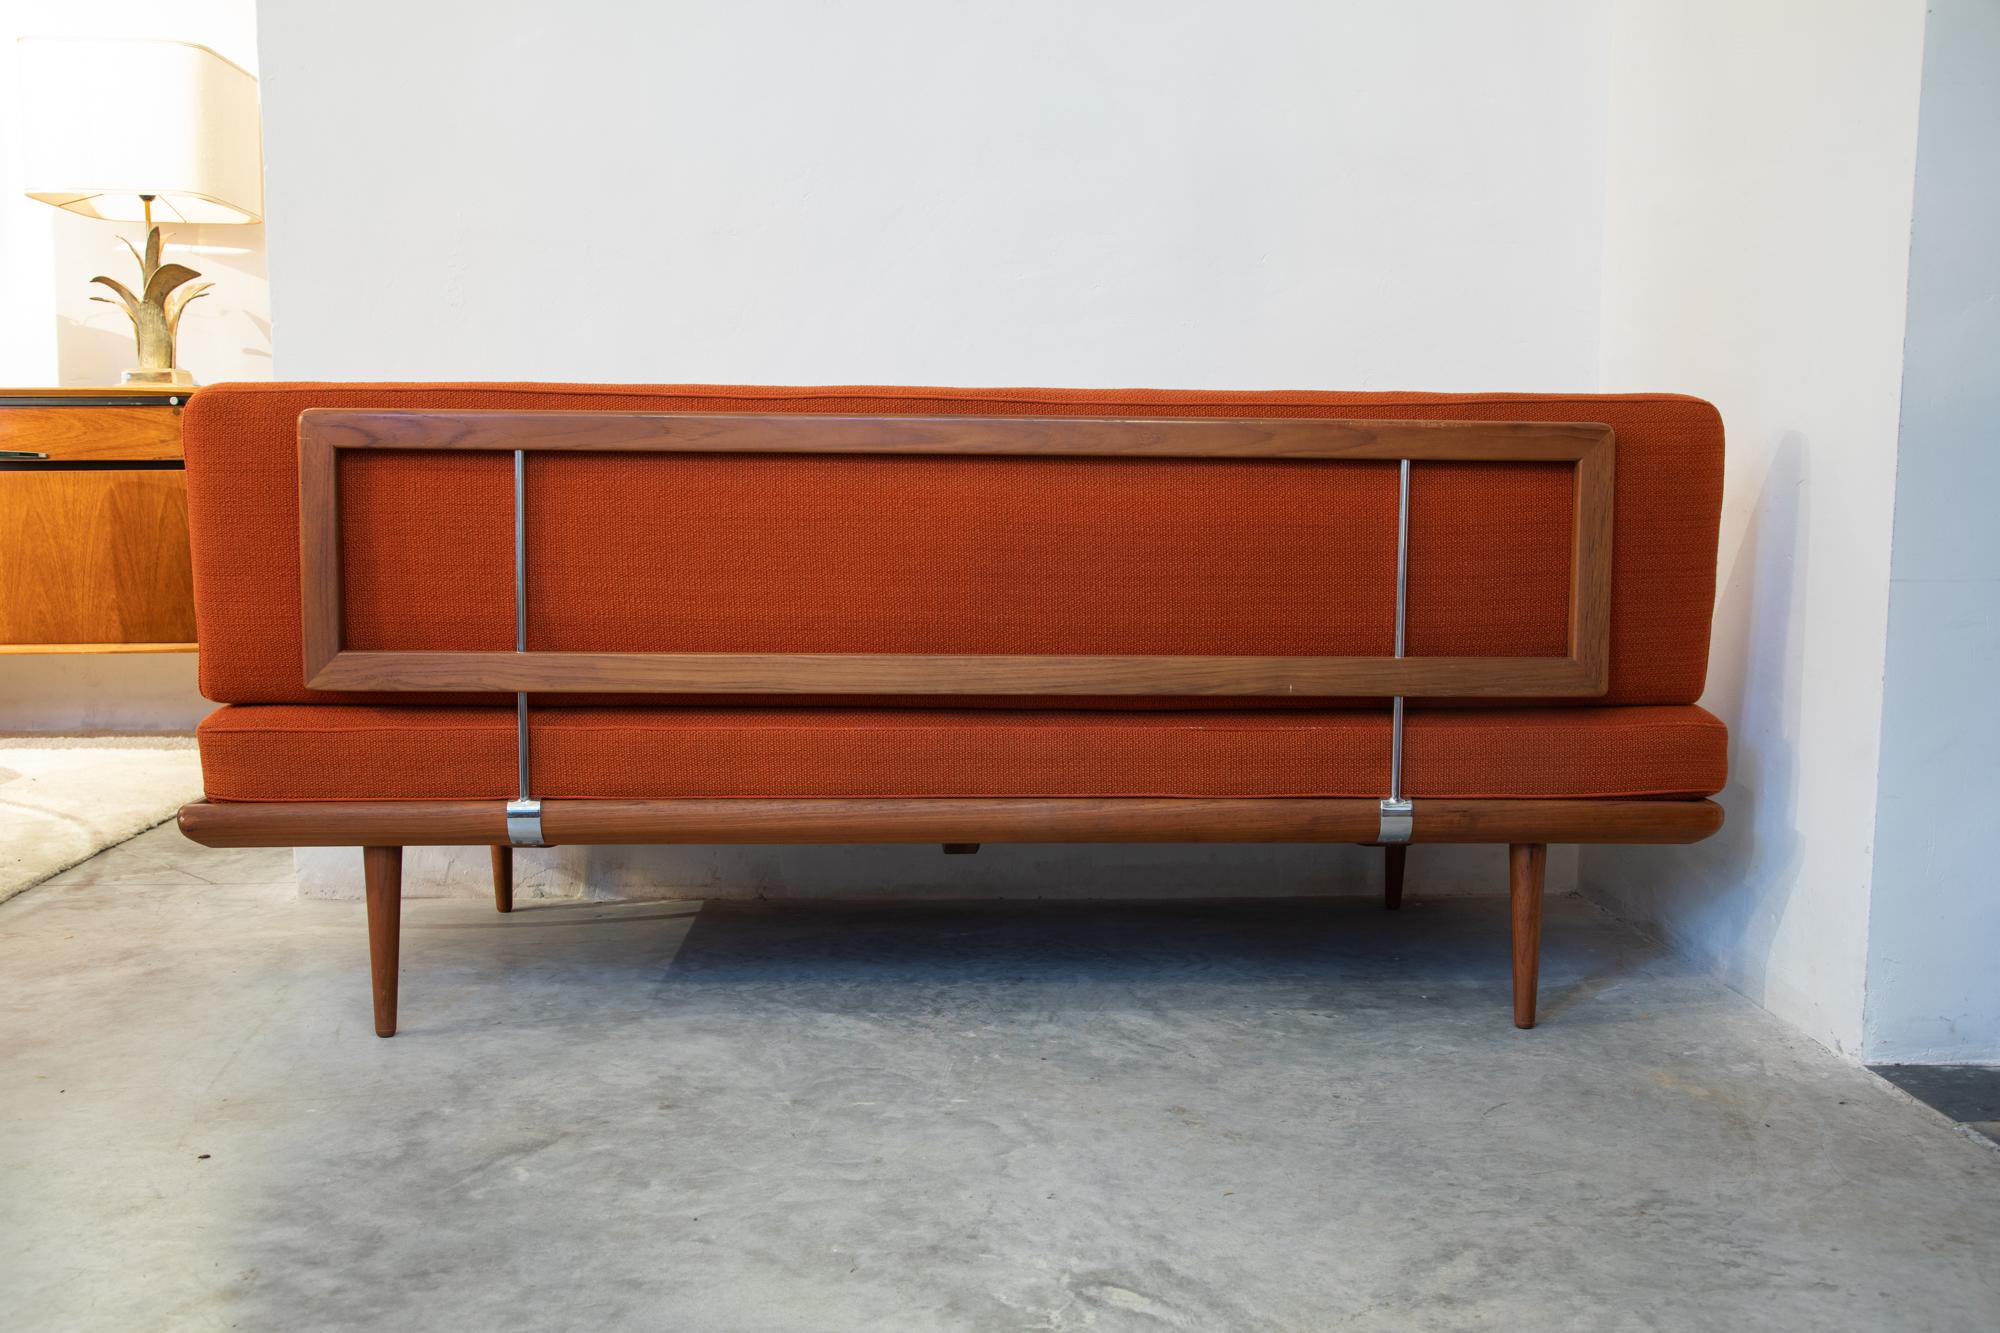 Midcentury Danish daybed in teak wood with slats and chrome accents. 
Original orange woven wool upholstery and comfortable spring mattress.
Minimalistic daybed/sofa model FD 417 'Minerva' by Peter Hvidt & Orla Mølgaard Nielsen for France & Son,